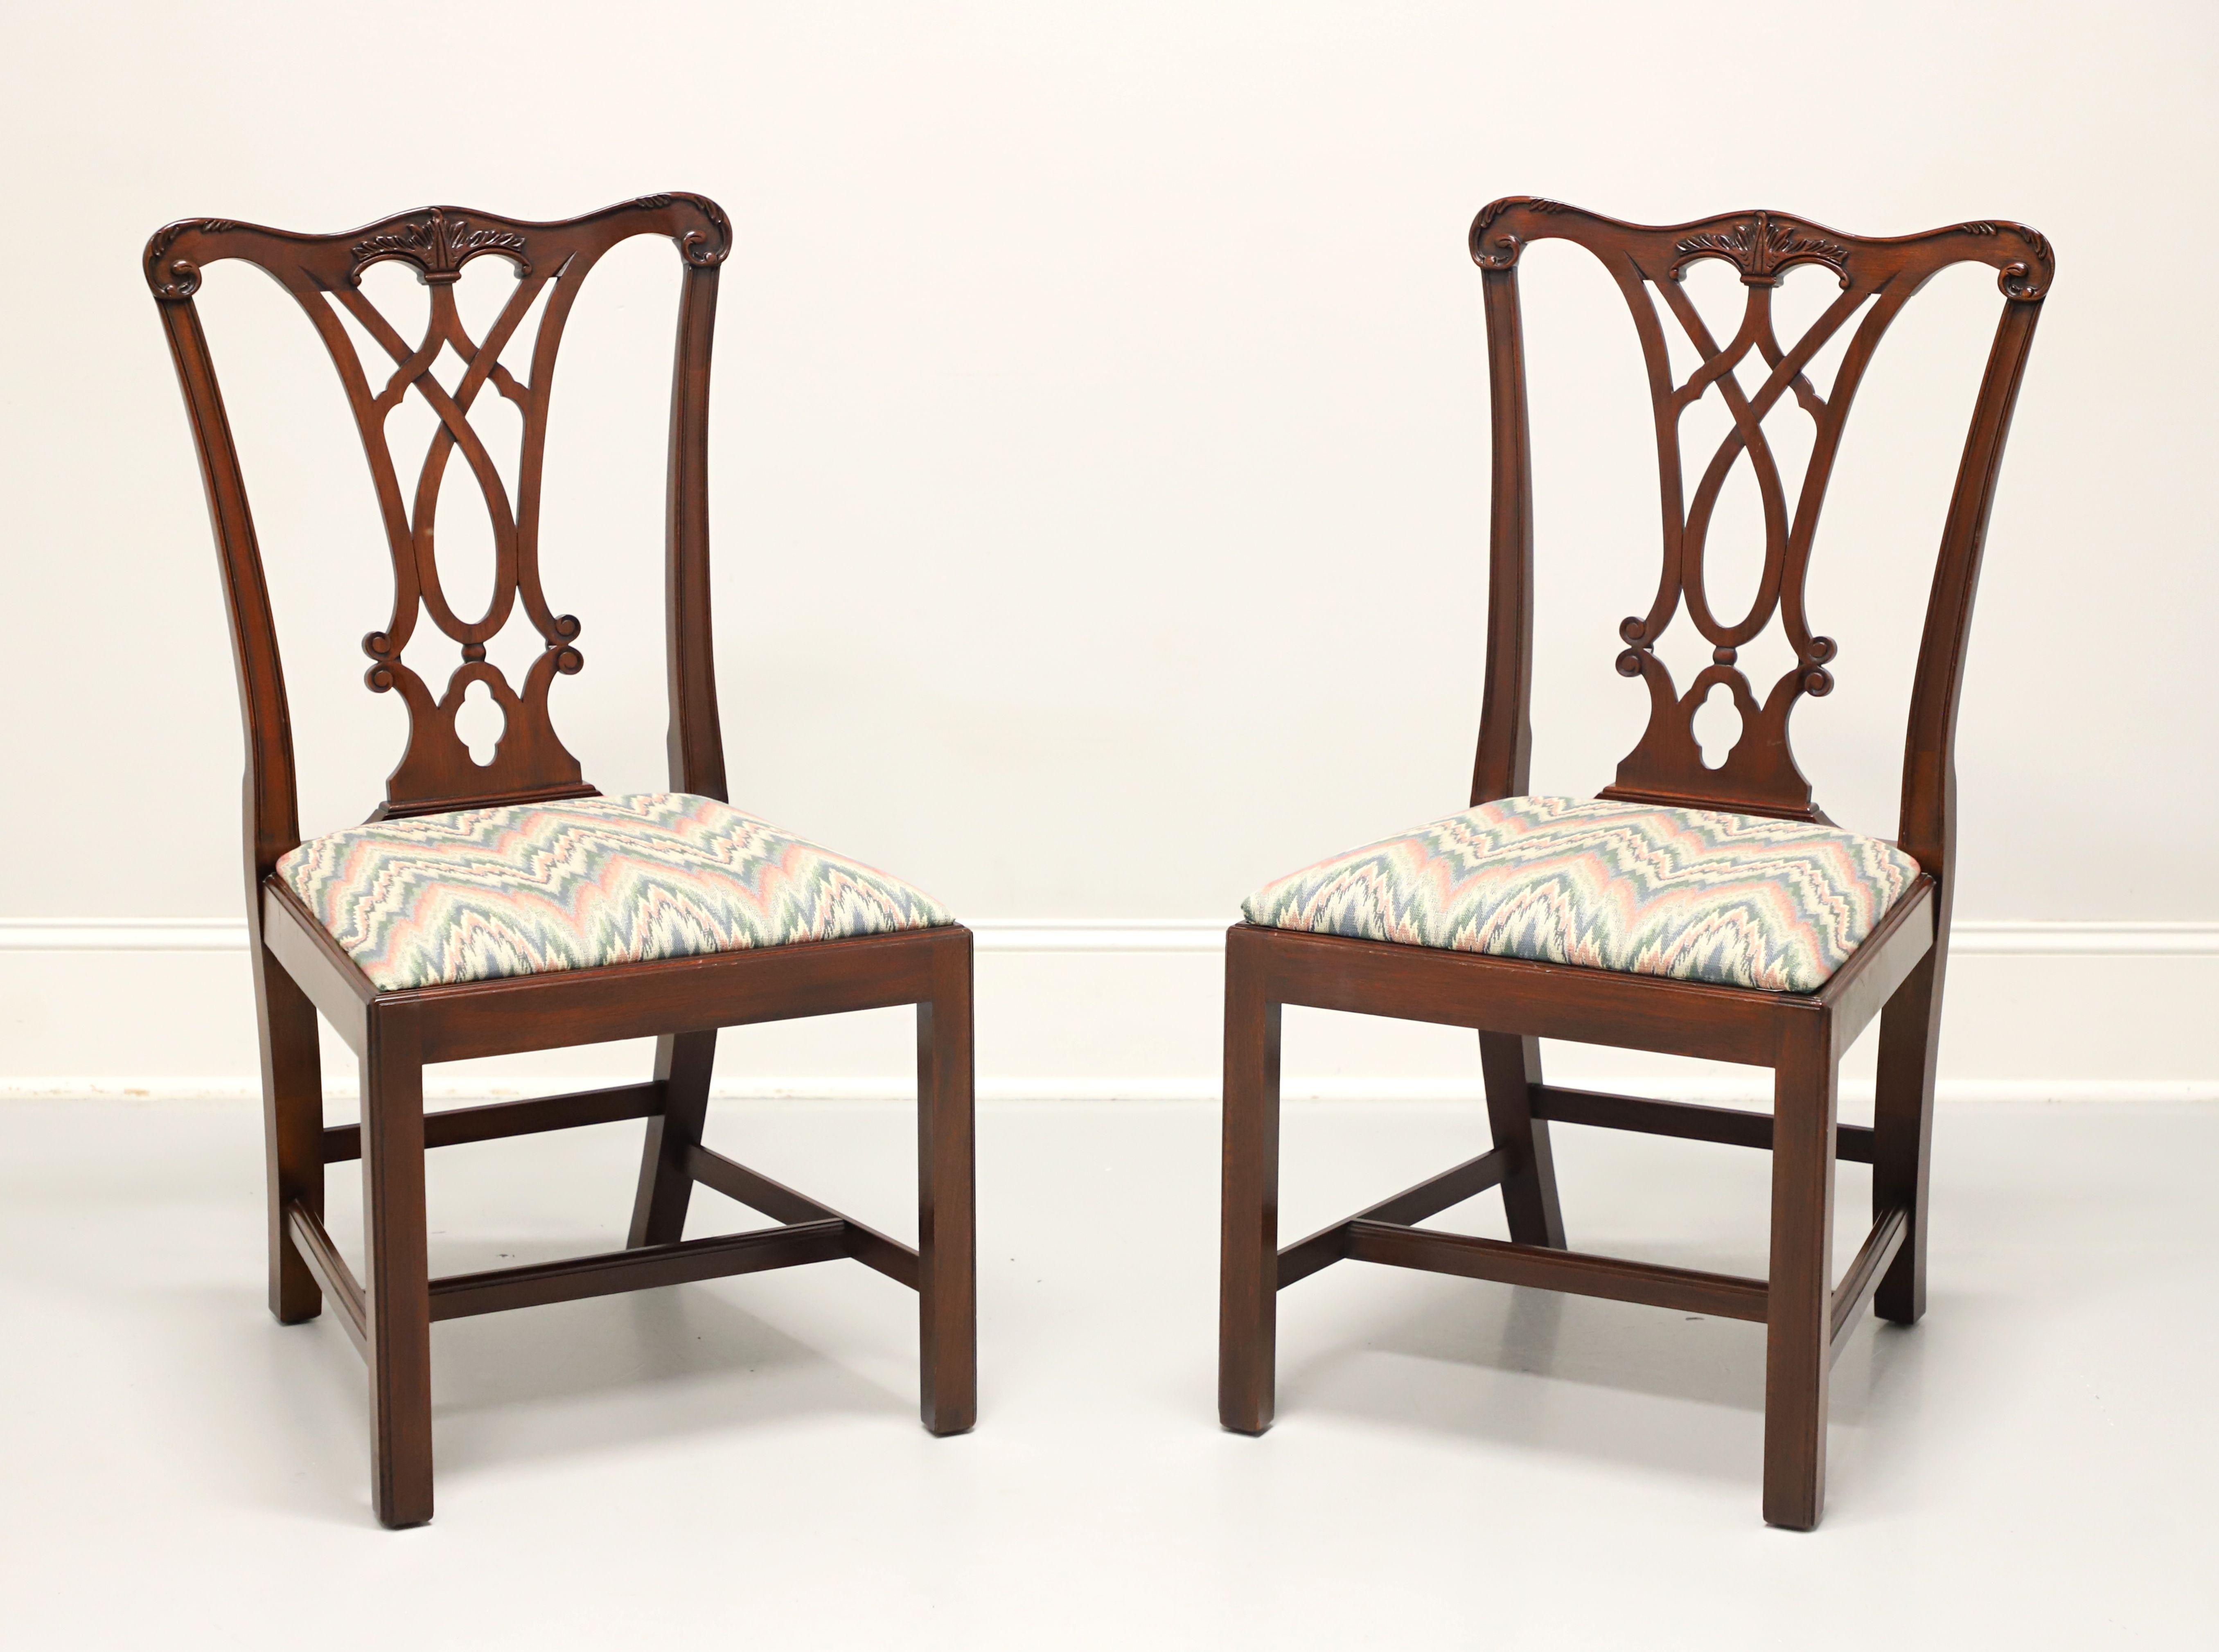 HENKEL HARRIS 107S 29 Mahogany Chippendale Dining Side Chairs - Pair B 6